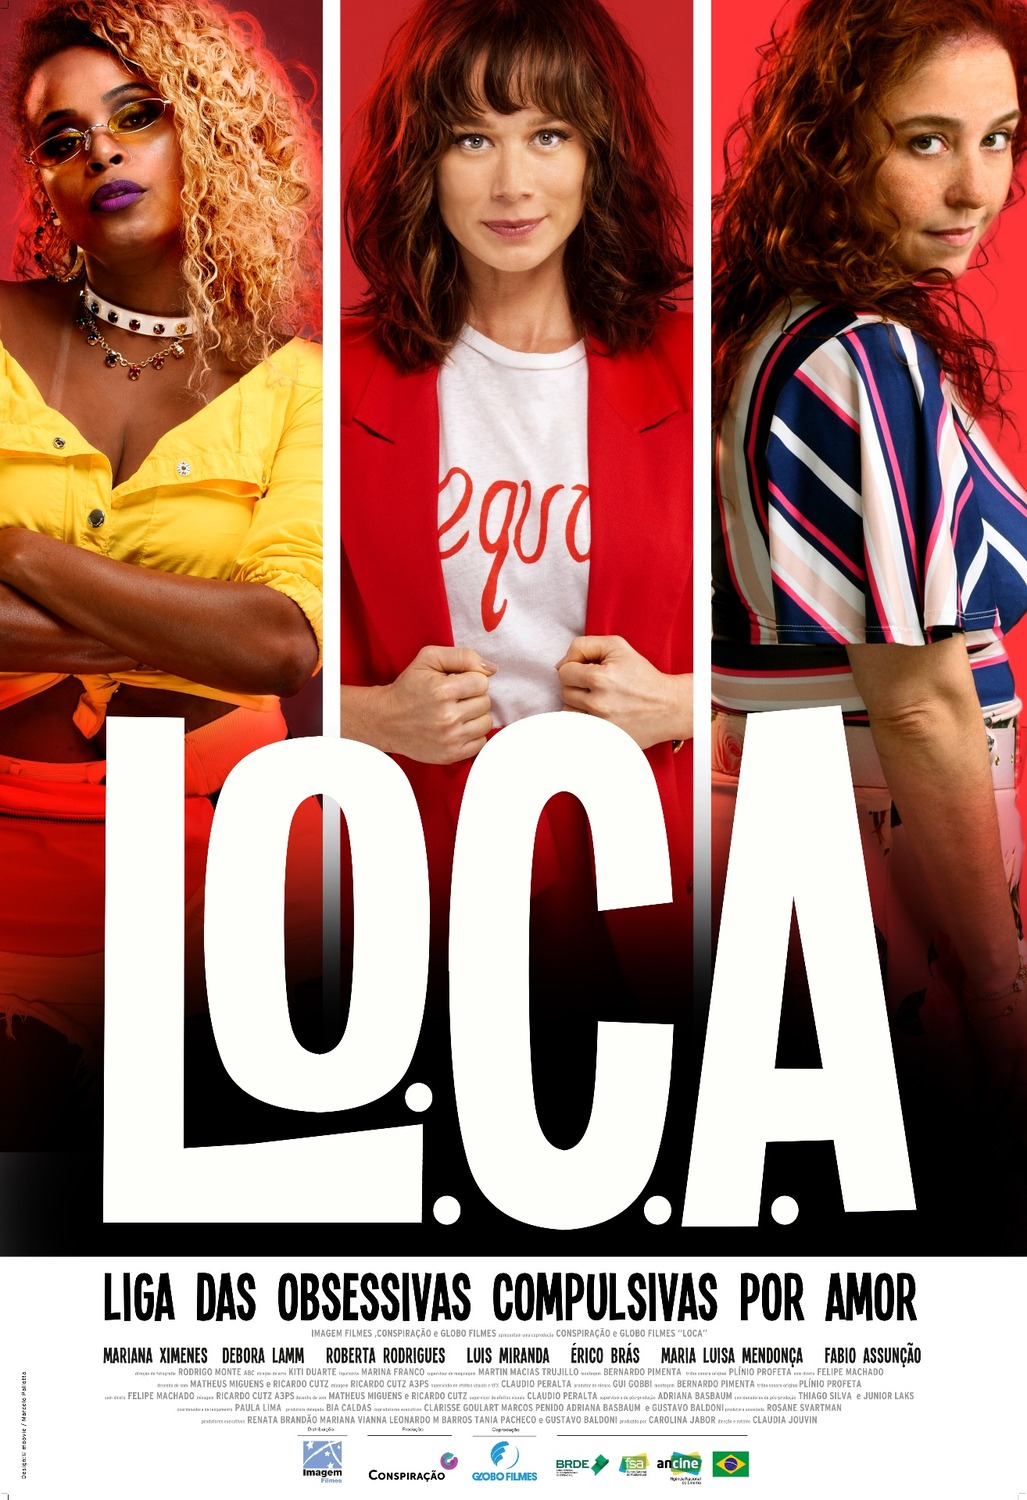 Extra Large Movie Poster Image for L.O.C.A. 